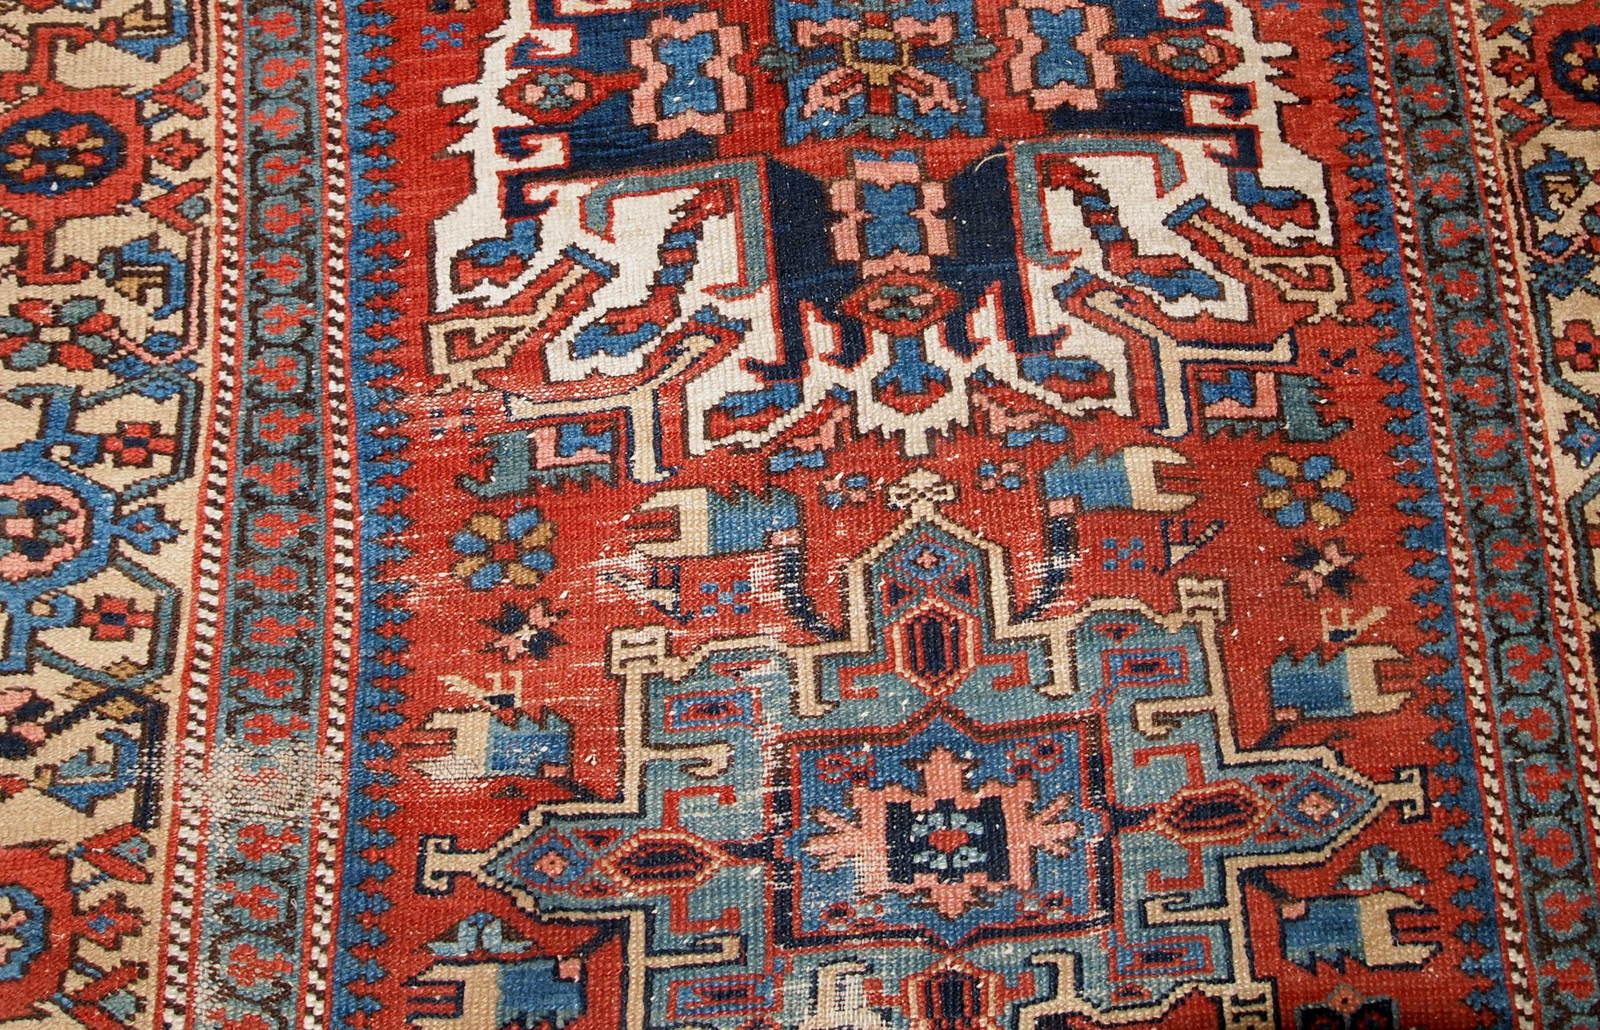 Antique Persian Heriz distressed rug in original condition. the rug made in classic design in red and blue shades It is from the end of 19th century.